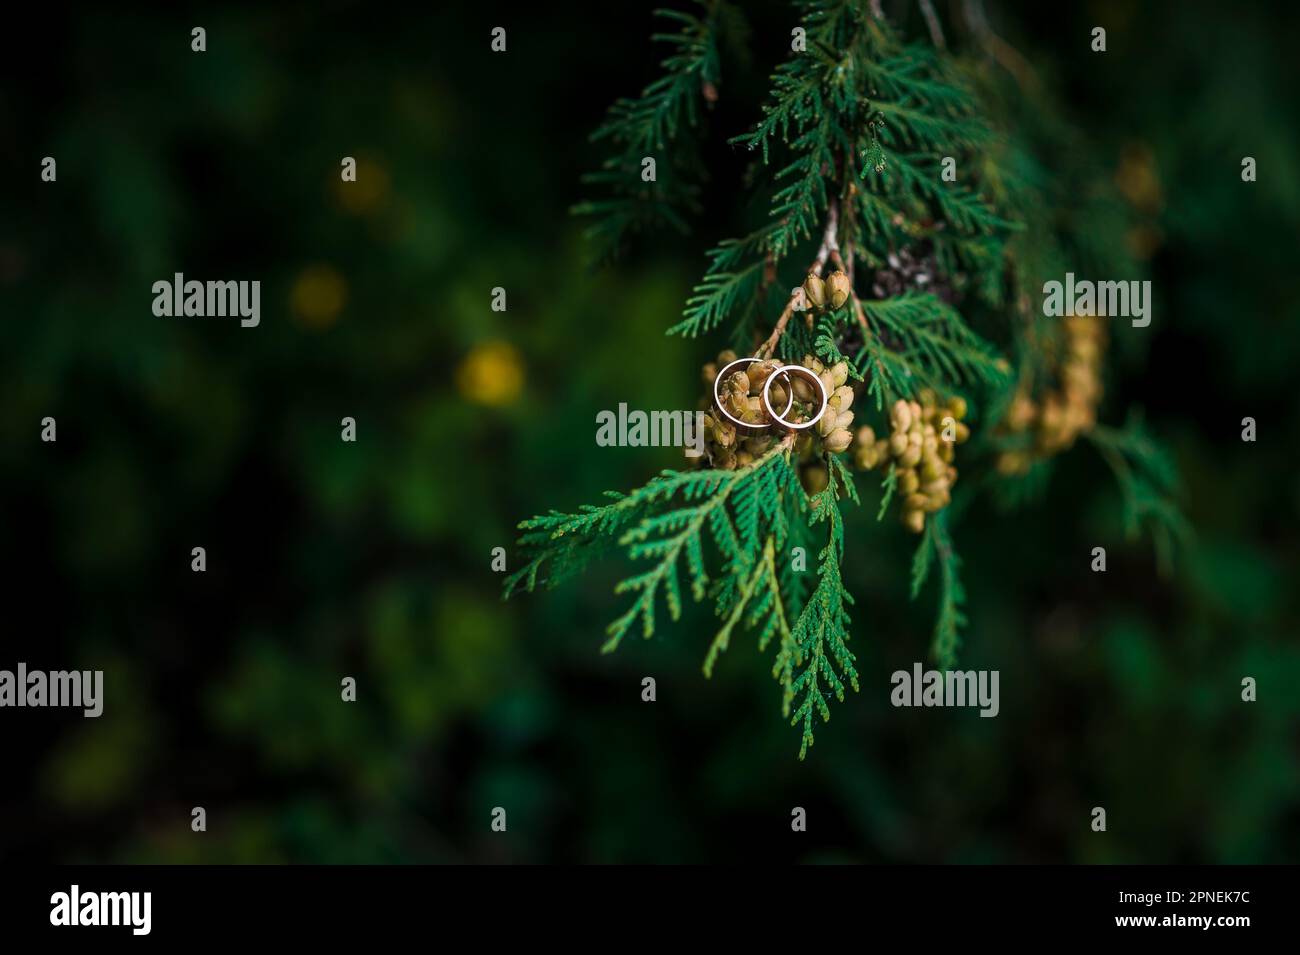 Pair of golden wedding rings on green thuja branches Stock Photo